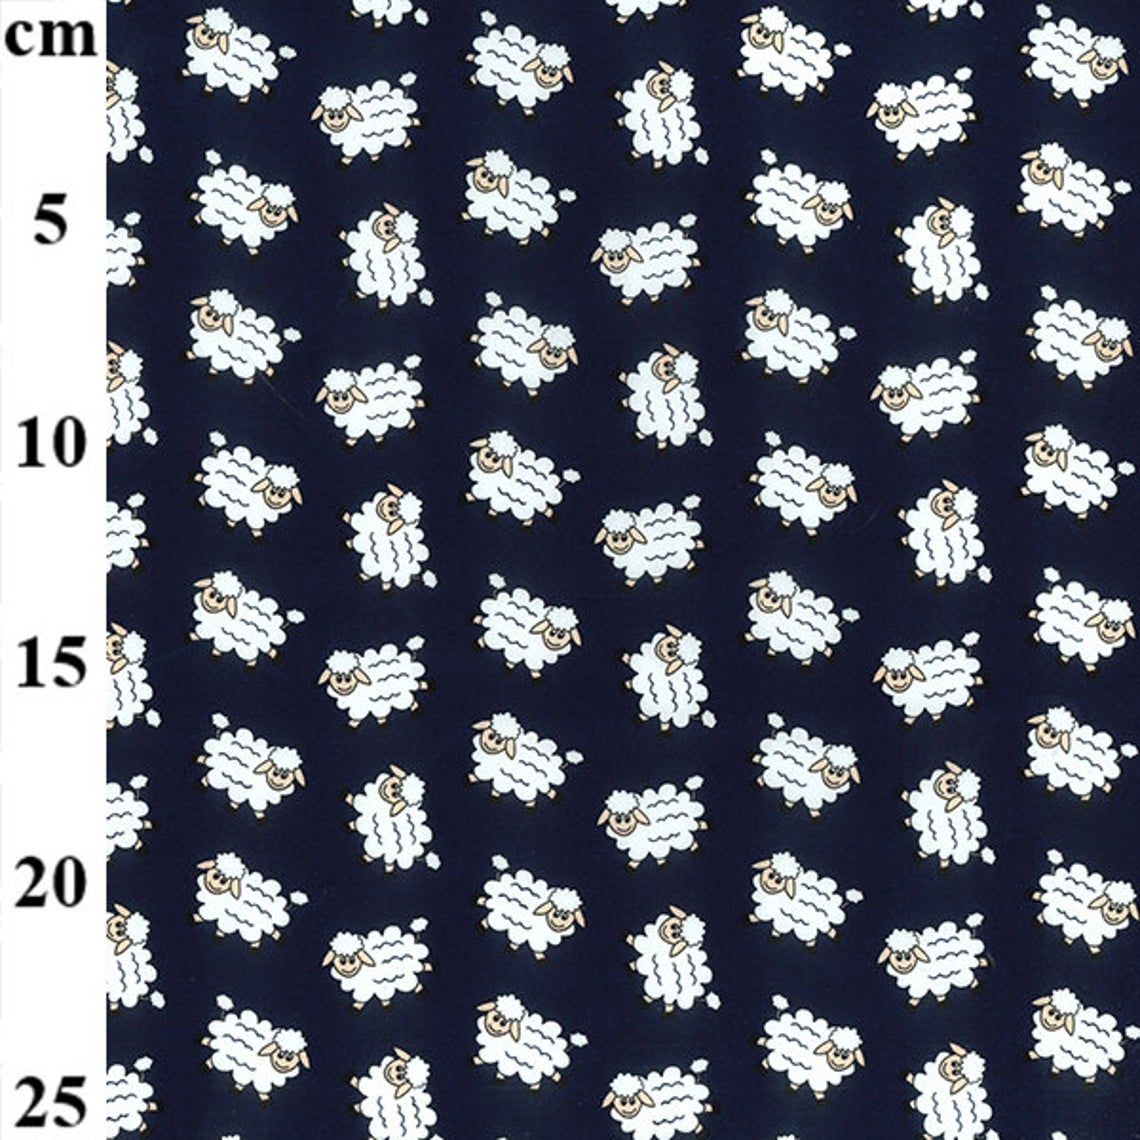 /images/product-images/2020images/FashionFabric/COTTONPOPLIN/Pop2021Aug/sheep-navy.jpg